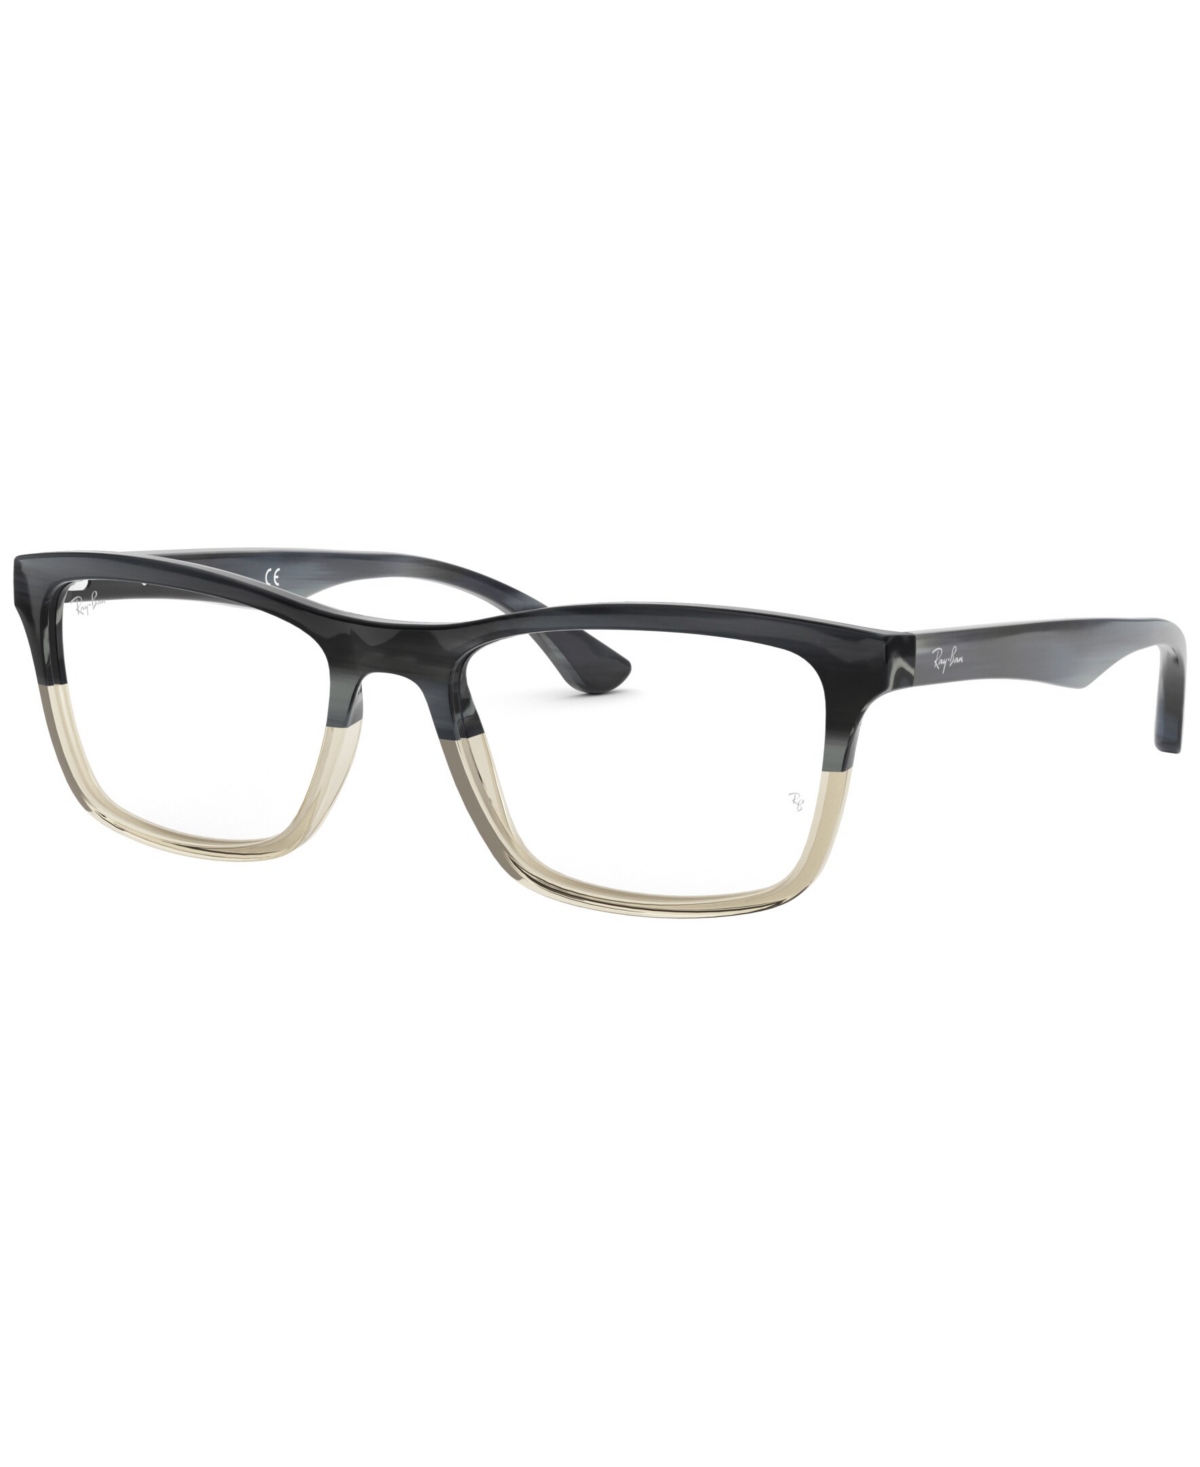 EAN 8053672430172 product image for Ray-Ban RX5279 Unisex Square Eyeglasses | upcitemdb.com